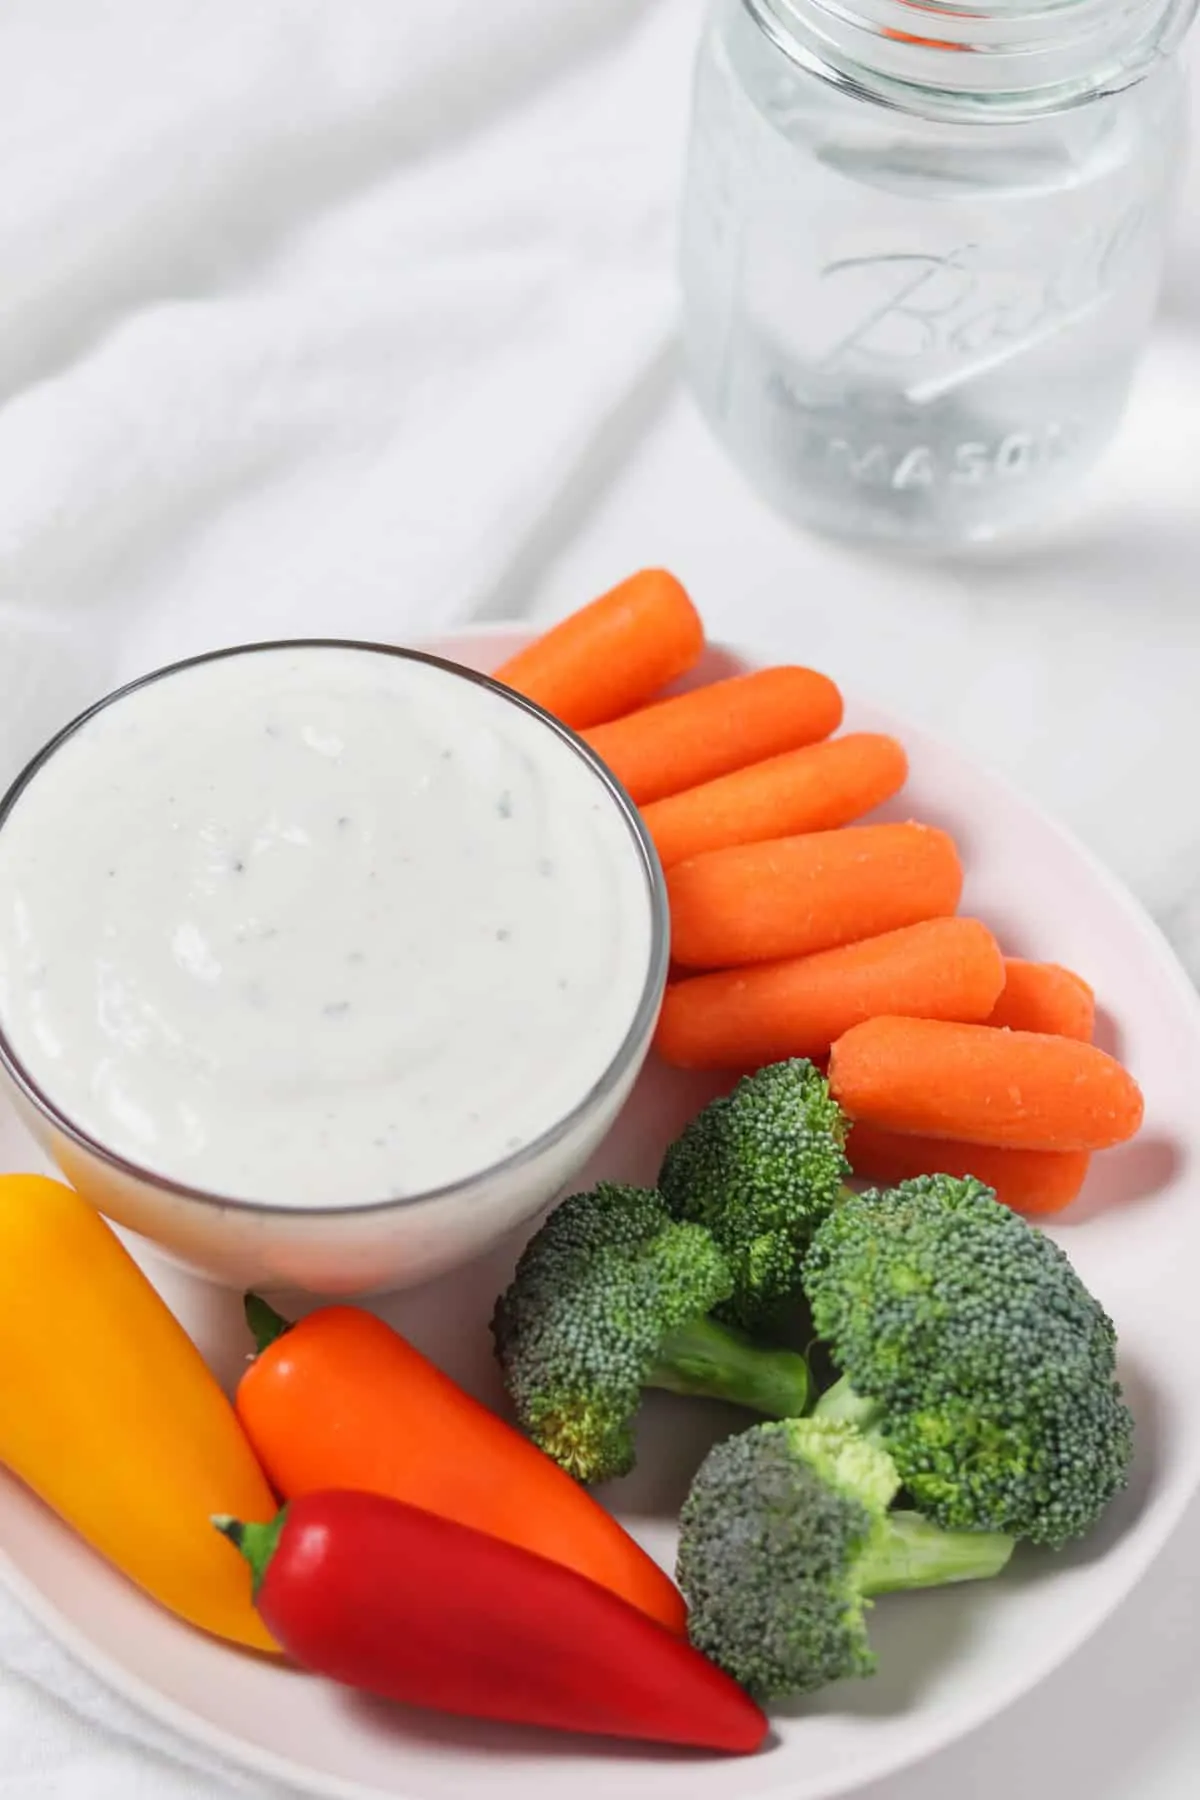 low calorie buttermilk ranch dip with a plate of vegetables and a glass of water